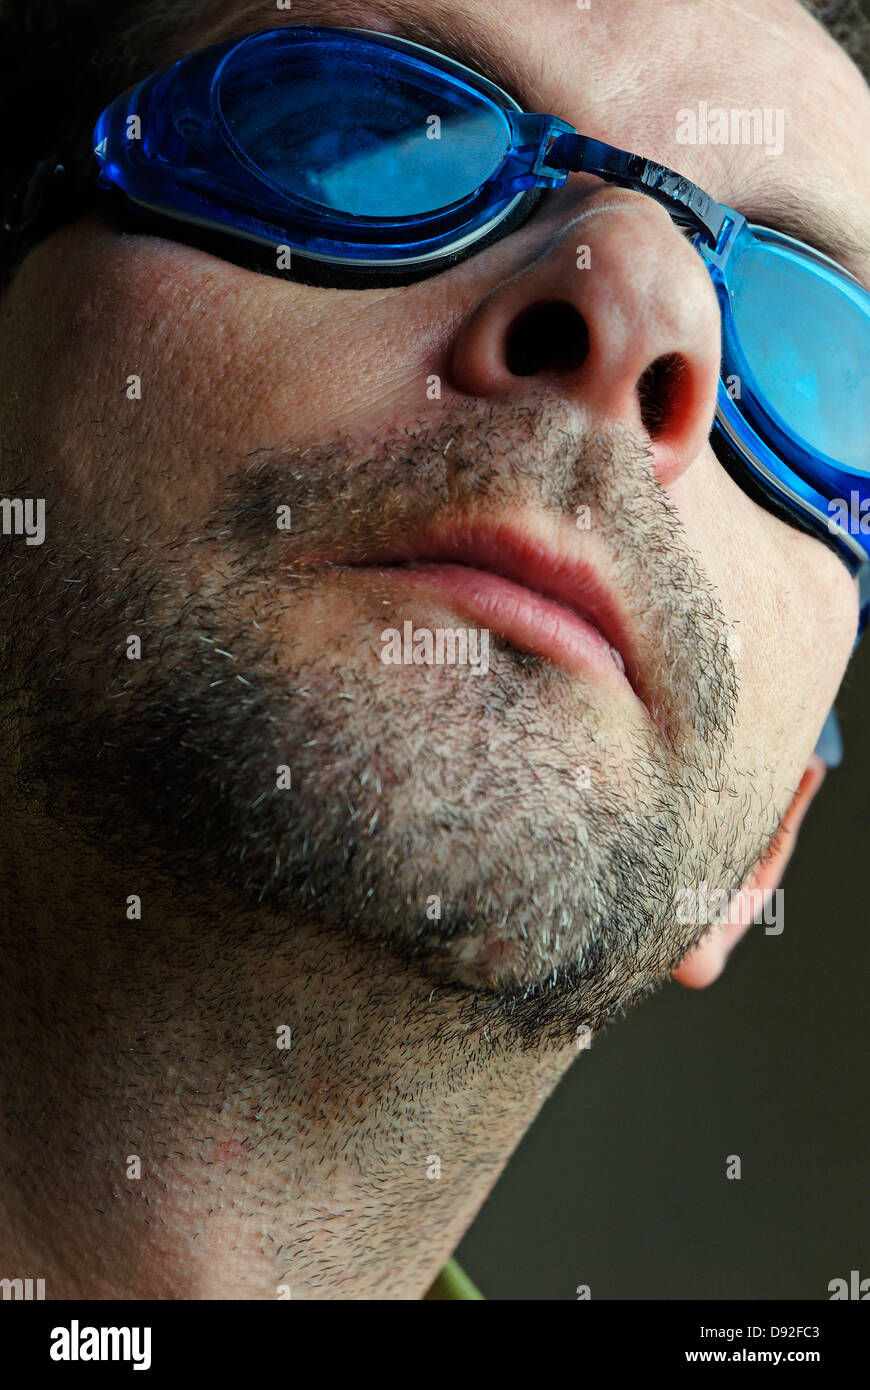 A man with blue swimming goggles Stock Photo